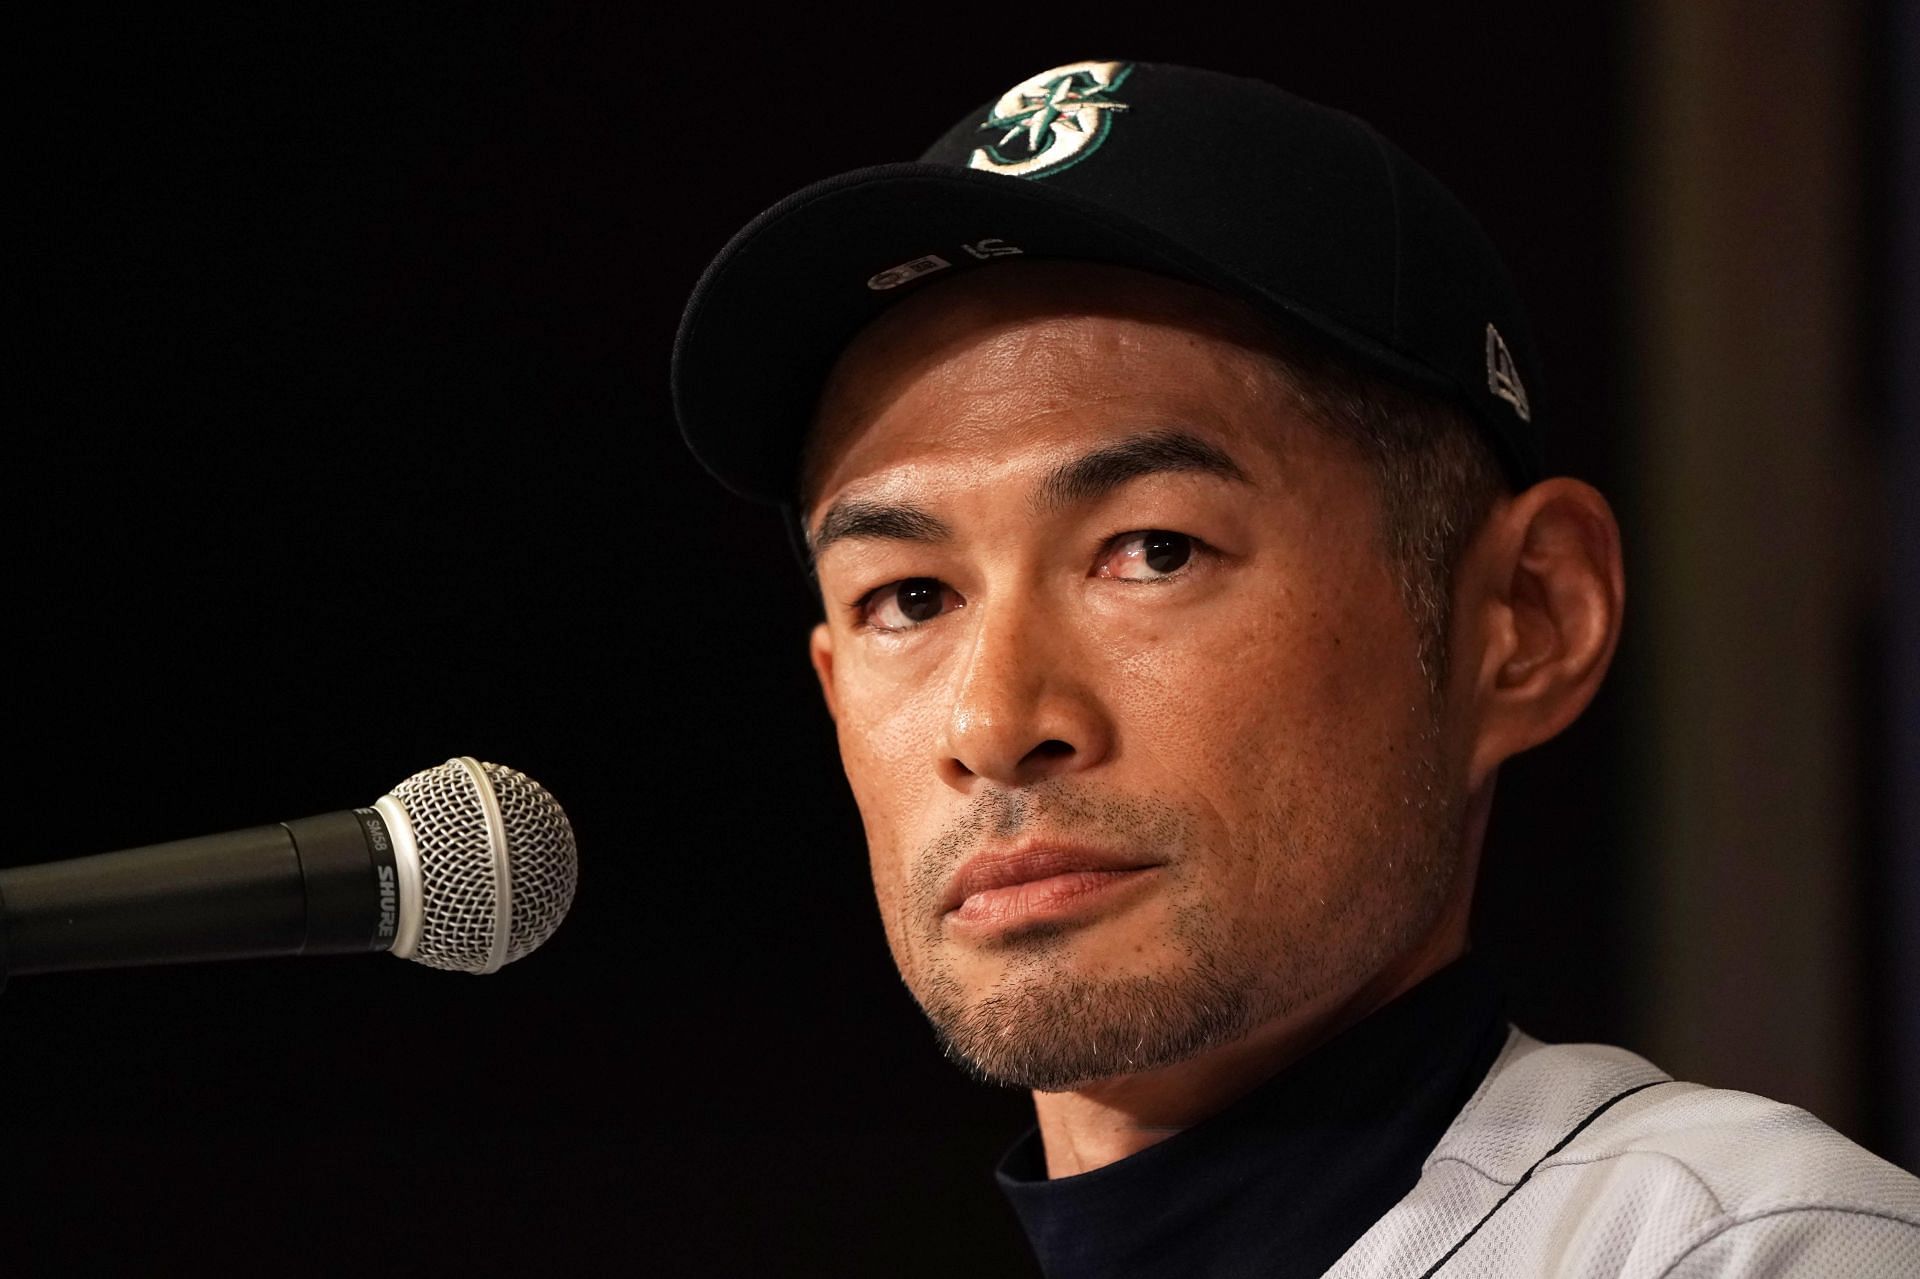 Ichiro Suzuki attends his retirement press conference after the game between Seattle Mariners and Oakland Athletics